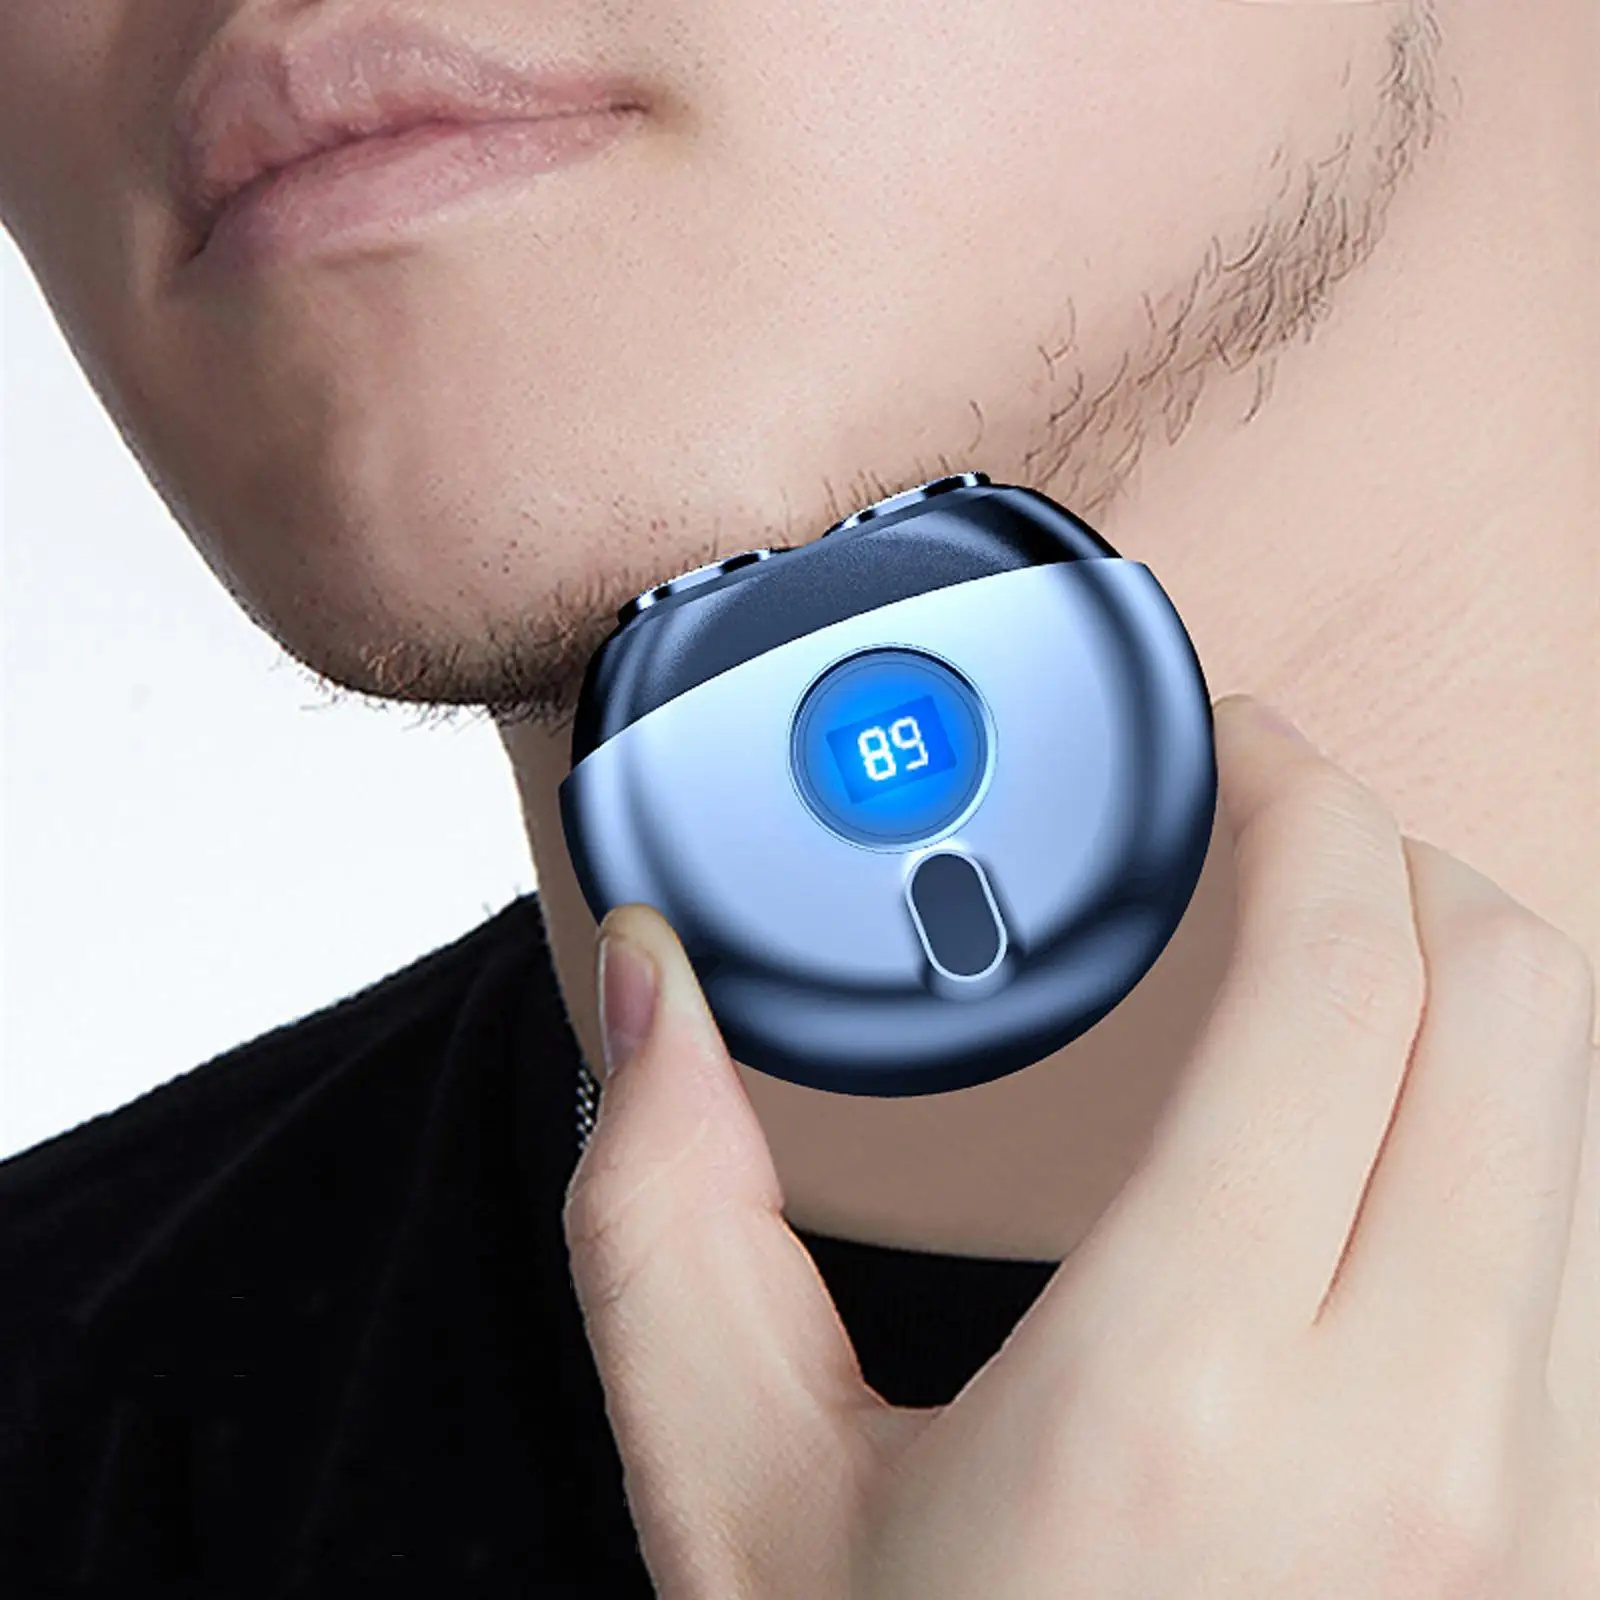 Compact Portable Electric Shaver Hair Removal LED Indicator Washable Head USB Rechargeable Mustache Use Gift